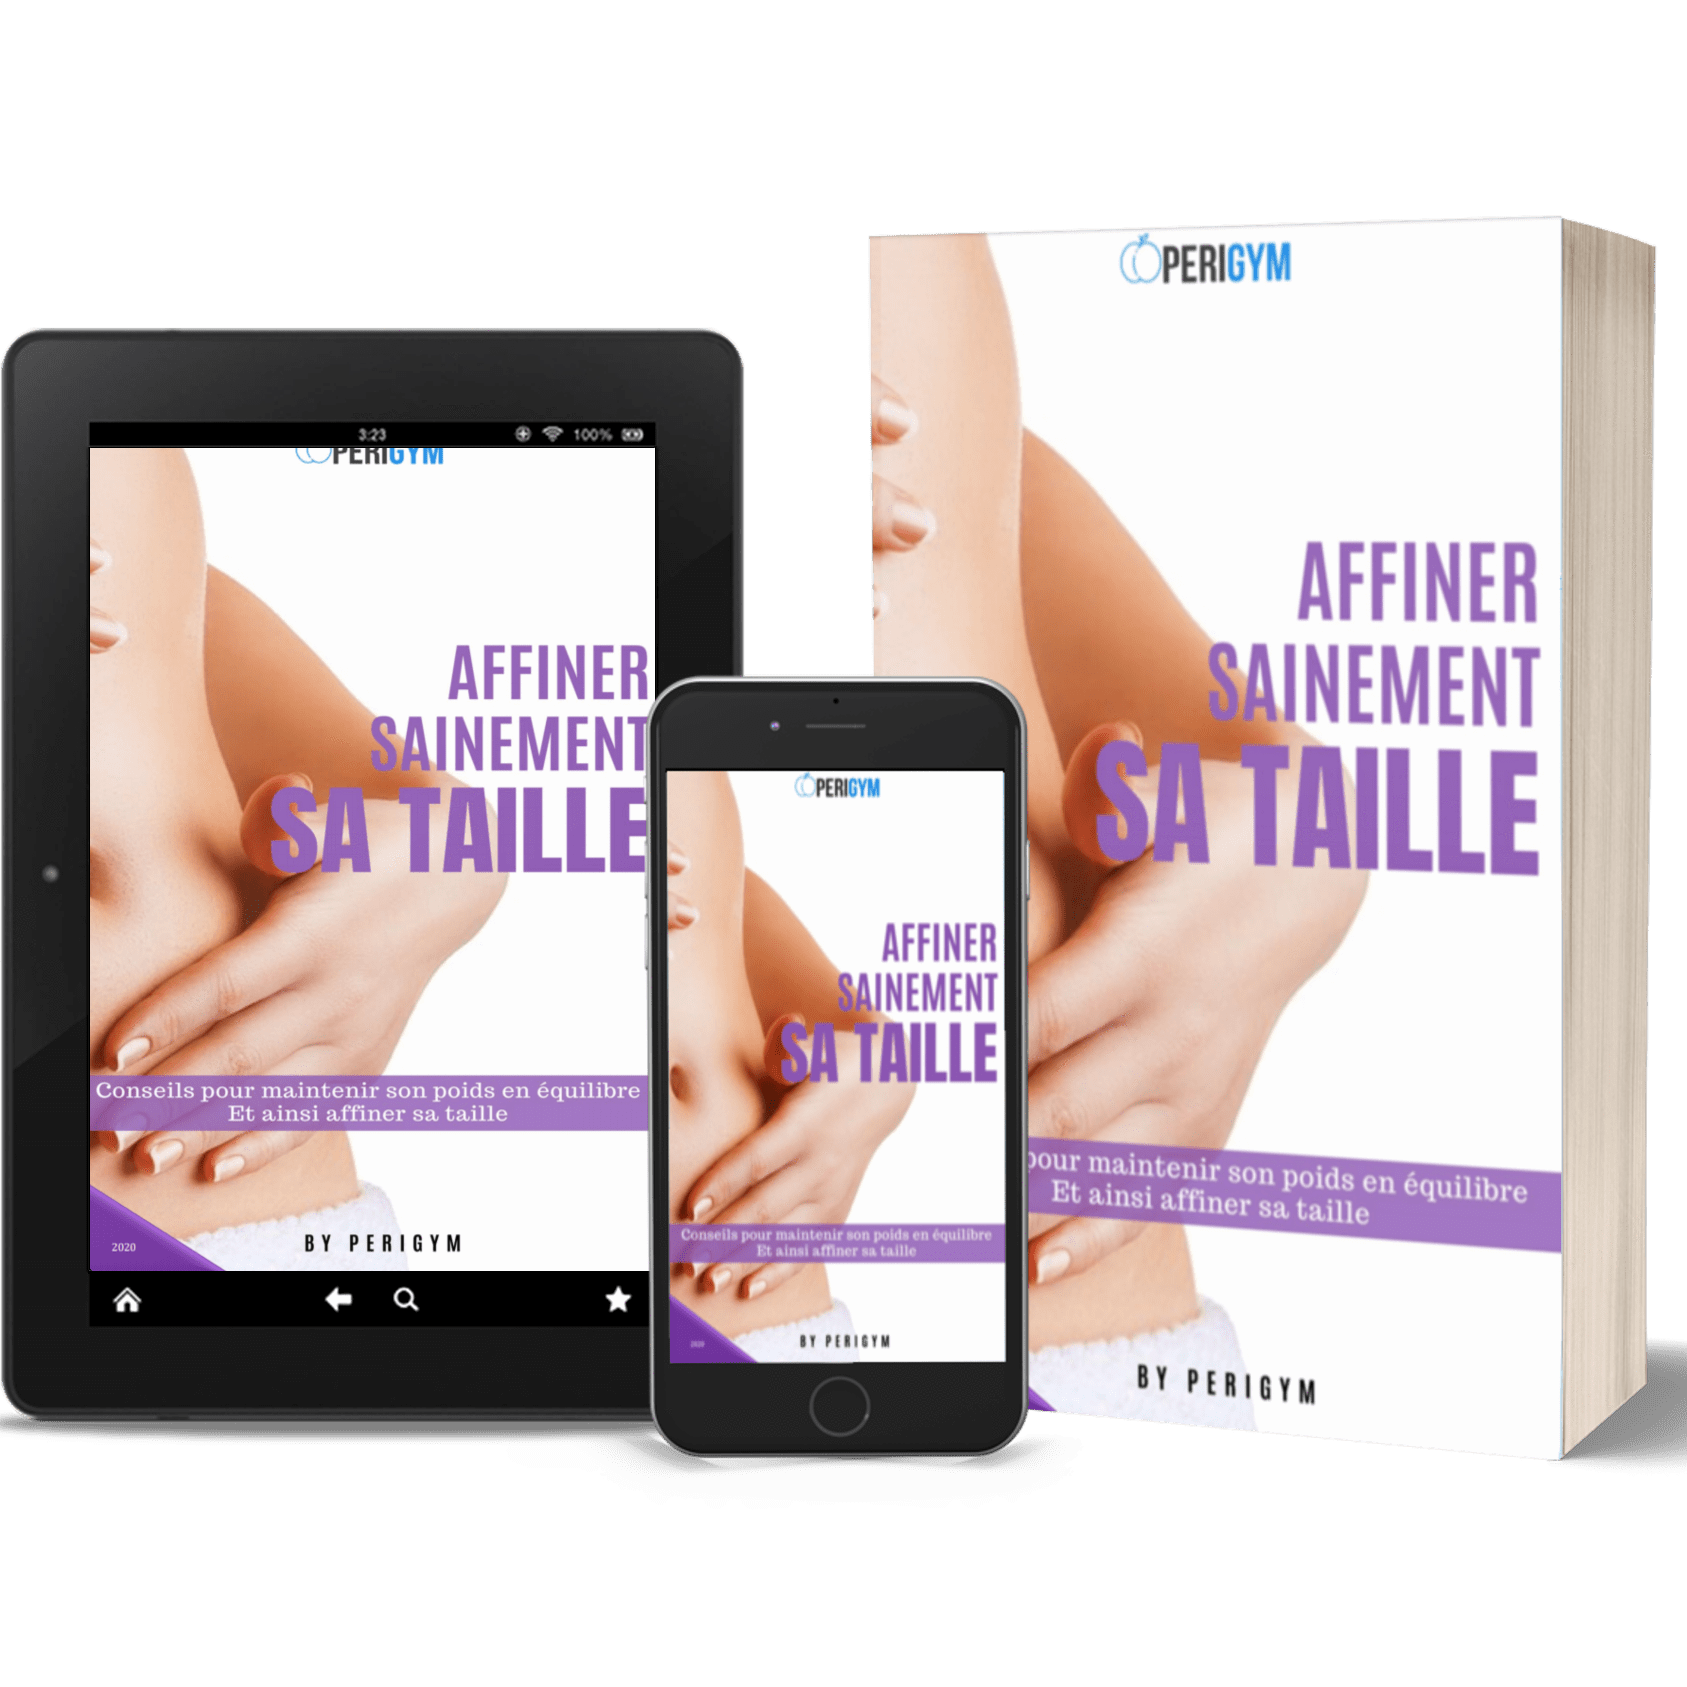 Perigym Affiner sainement sa taille